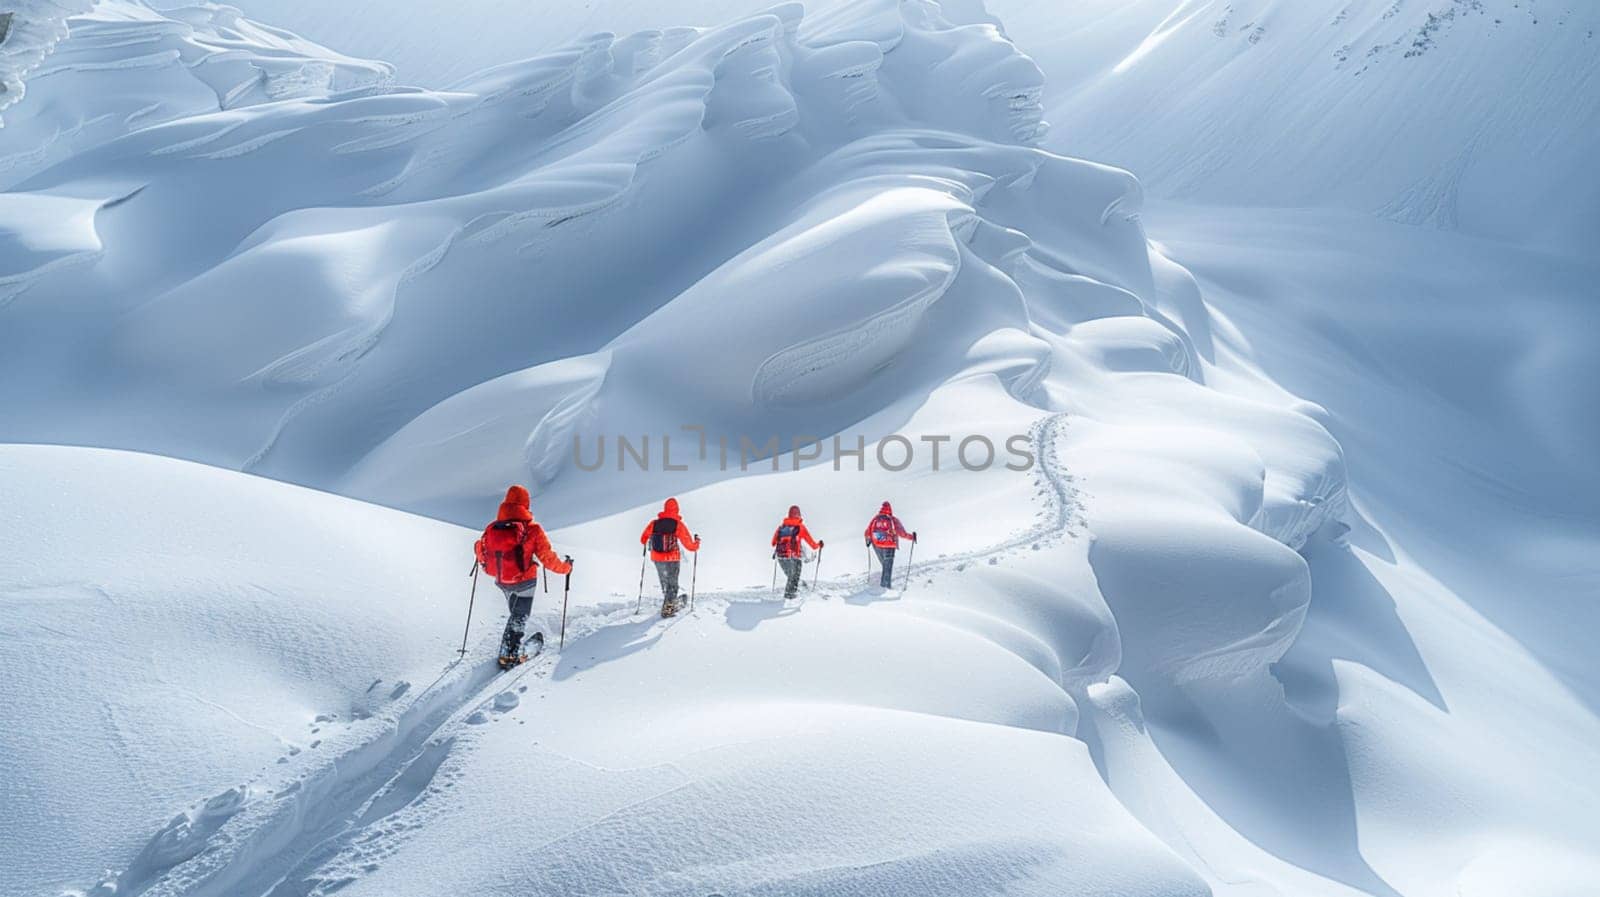 Trekkers ascending a snowy slope in a stark white winter landscape, endurance concept by verbano